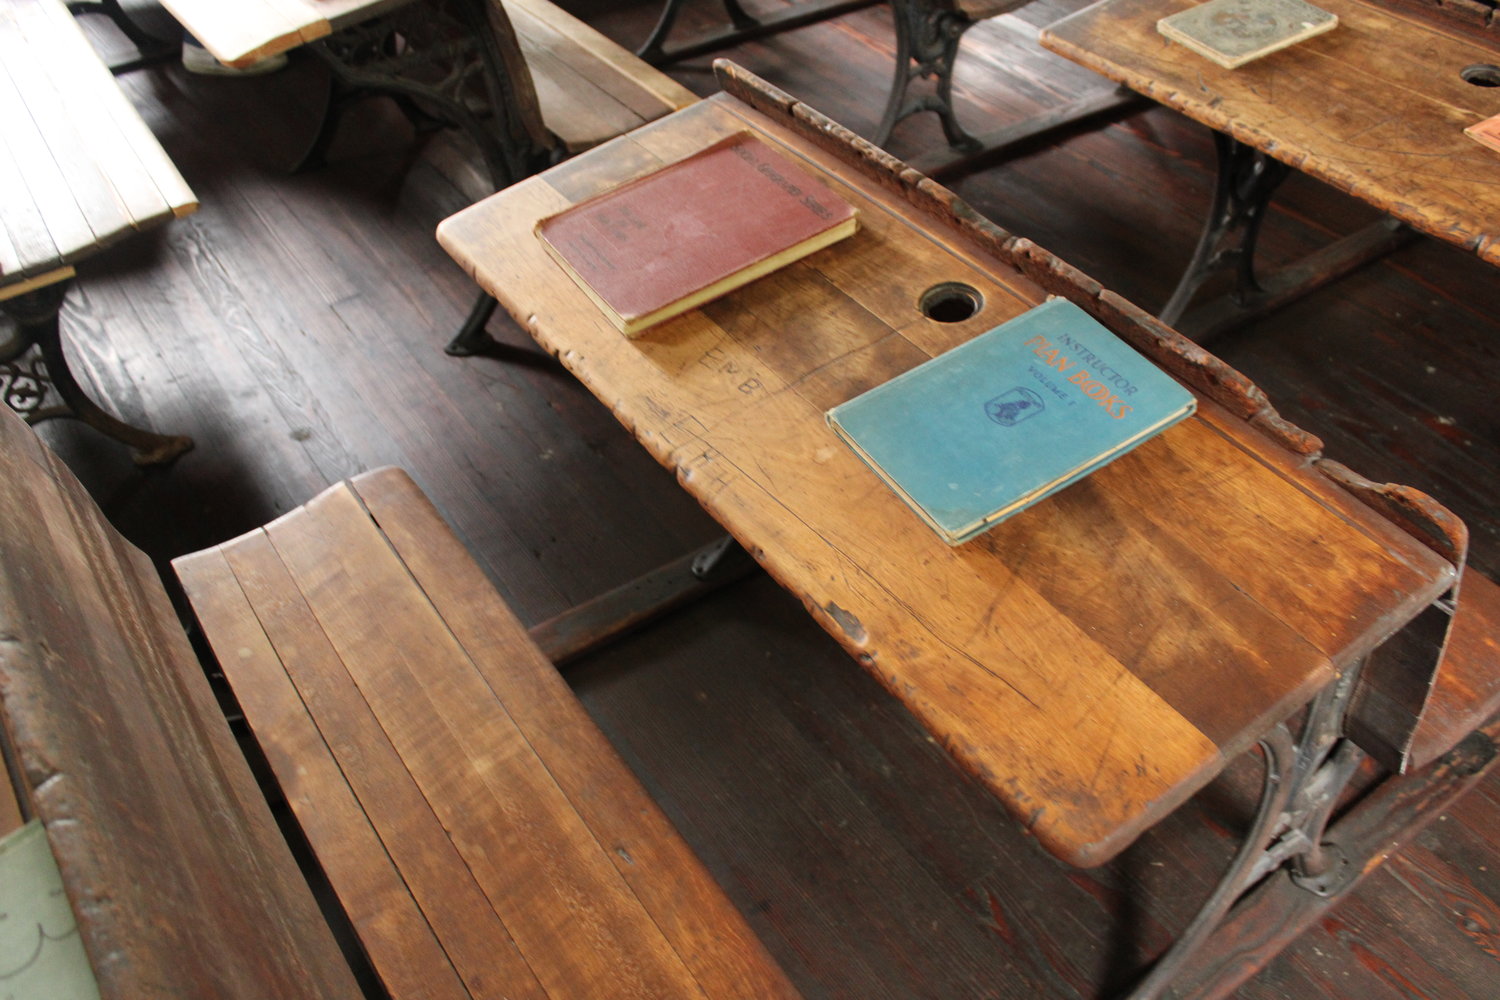 The vacant desks of Bethel School would soon be occupied by eager learners once again.